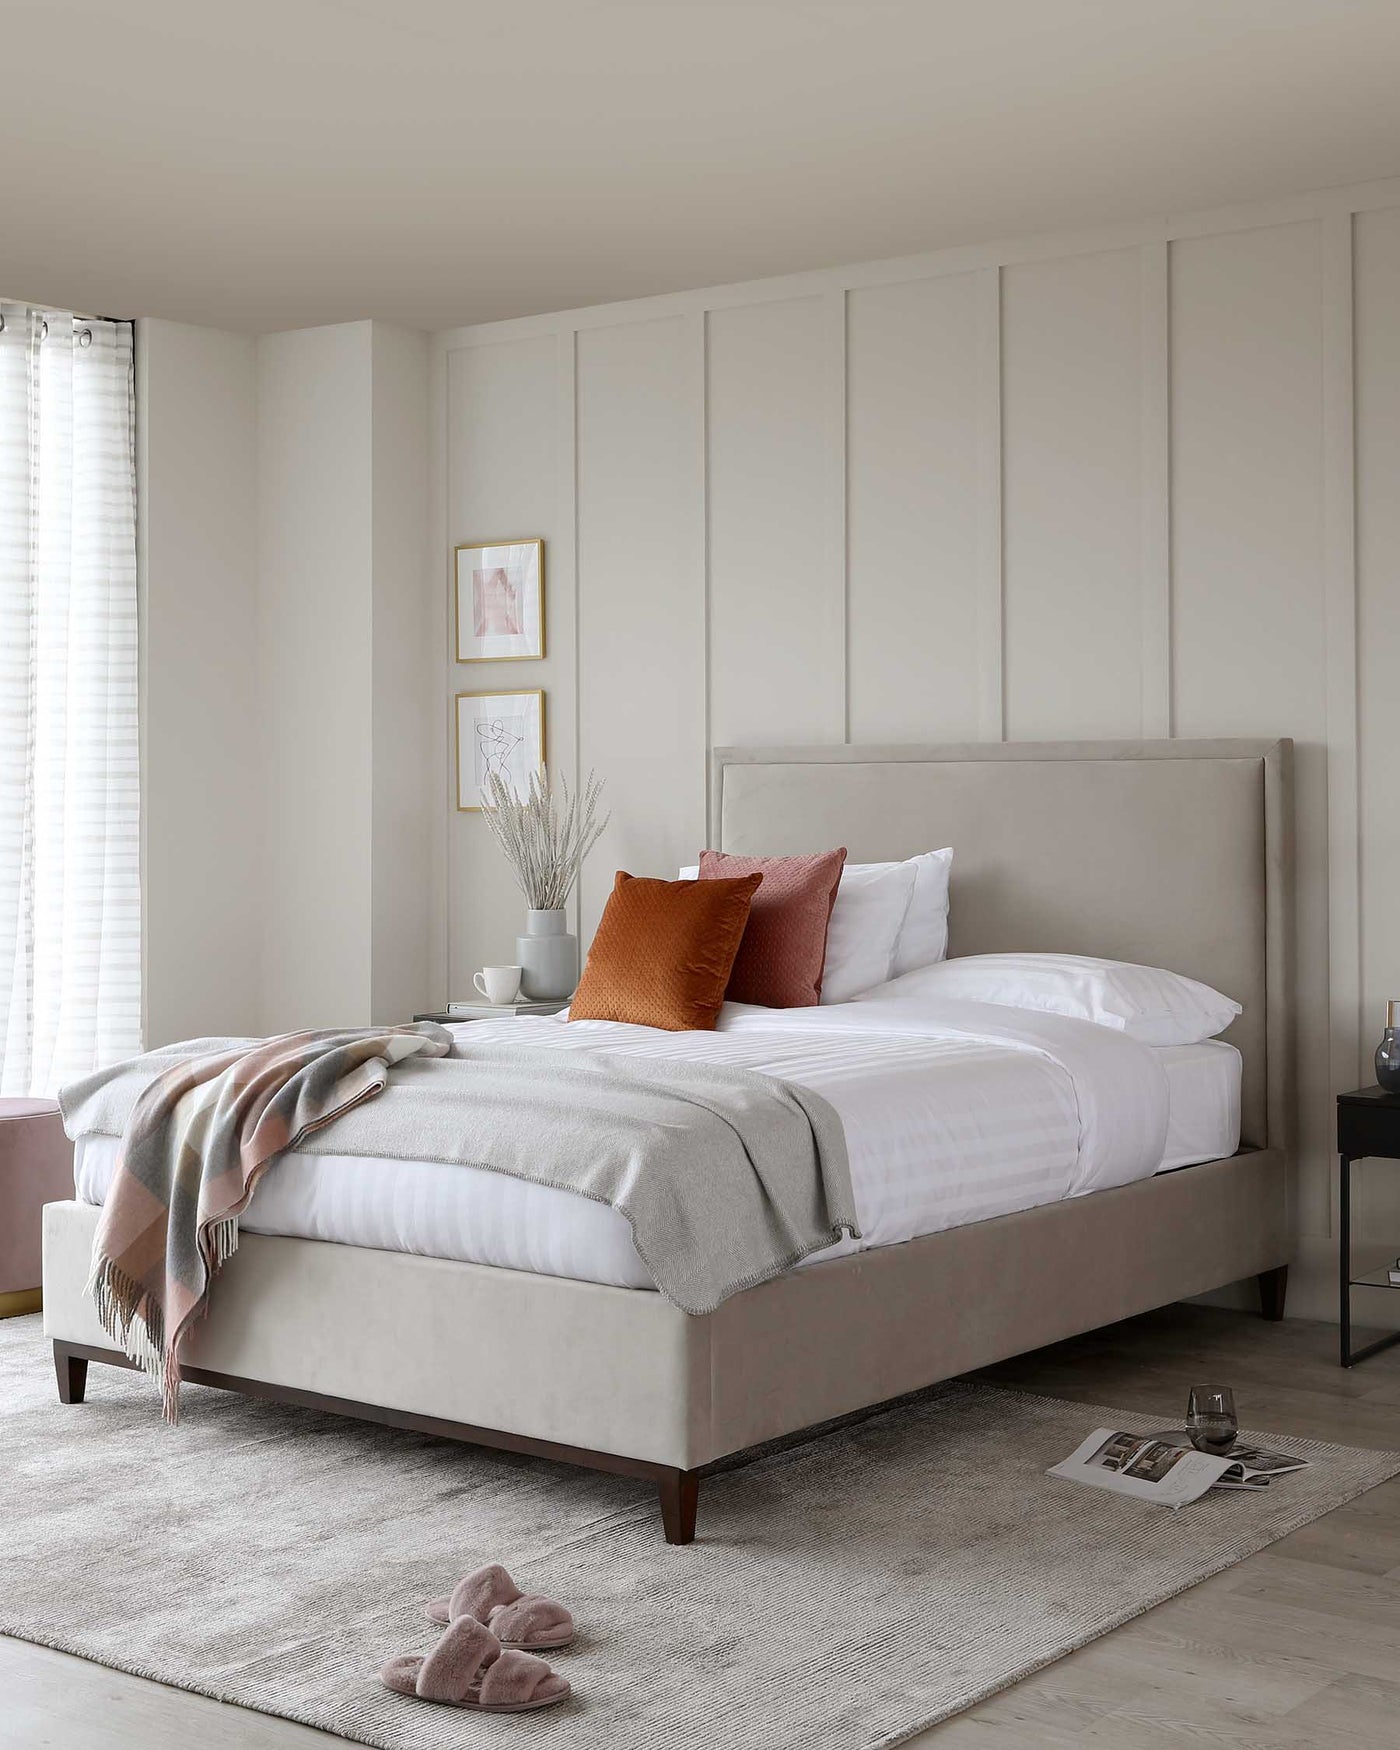 Elegant upholstered platform bed with a simple headboard in a neutral tone, complemented by crisp white bedding, accent pillows, and a soft throw blanket. The bed is placed on a textured area rug, completing a refined bedroom setting.